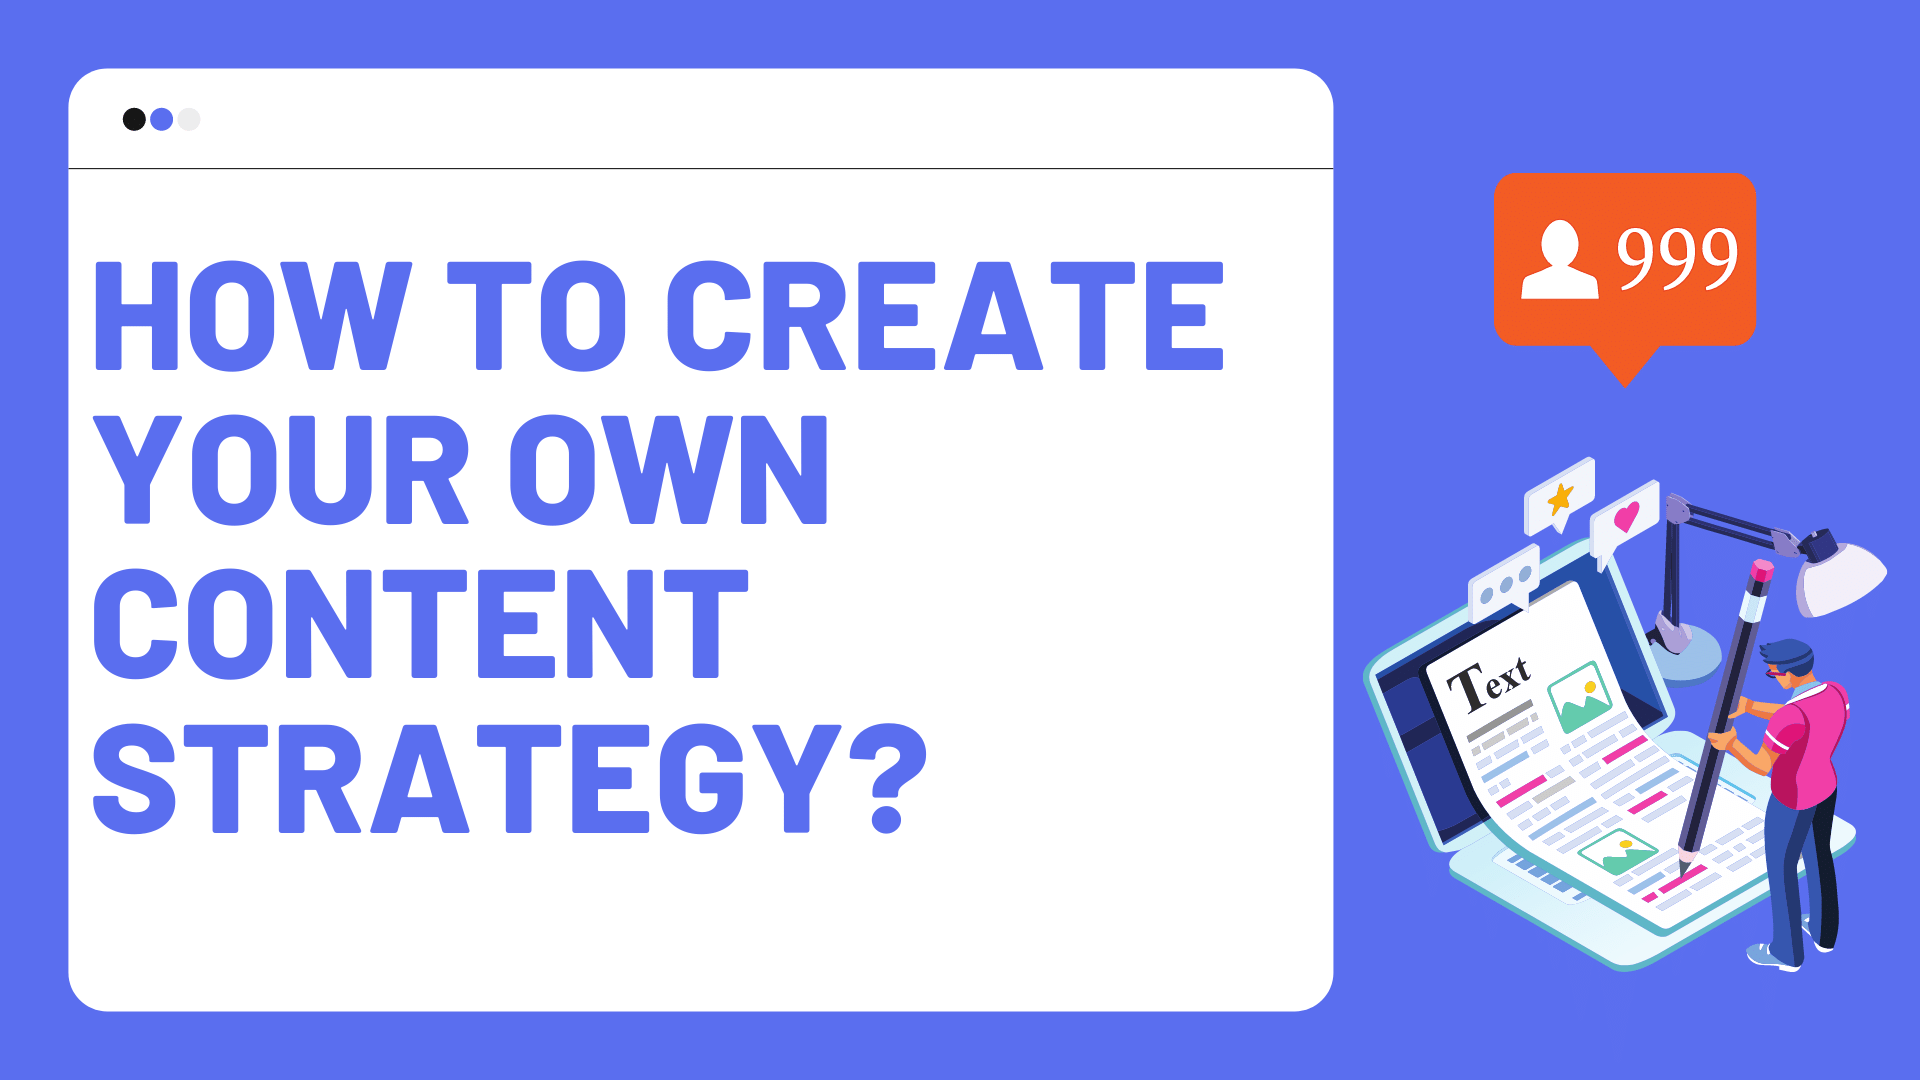 How to create your own content strategy?